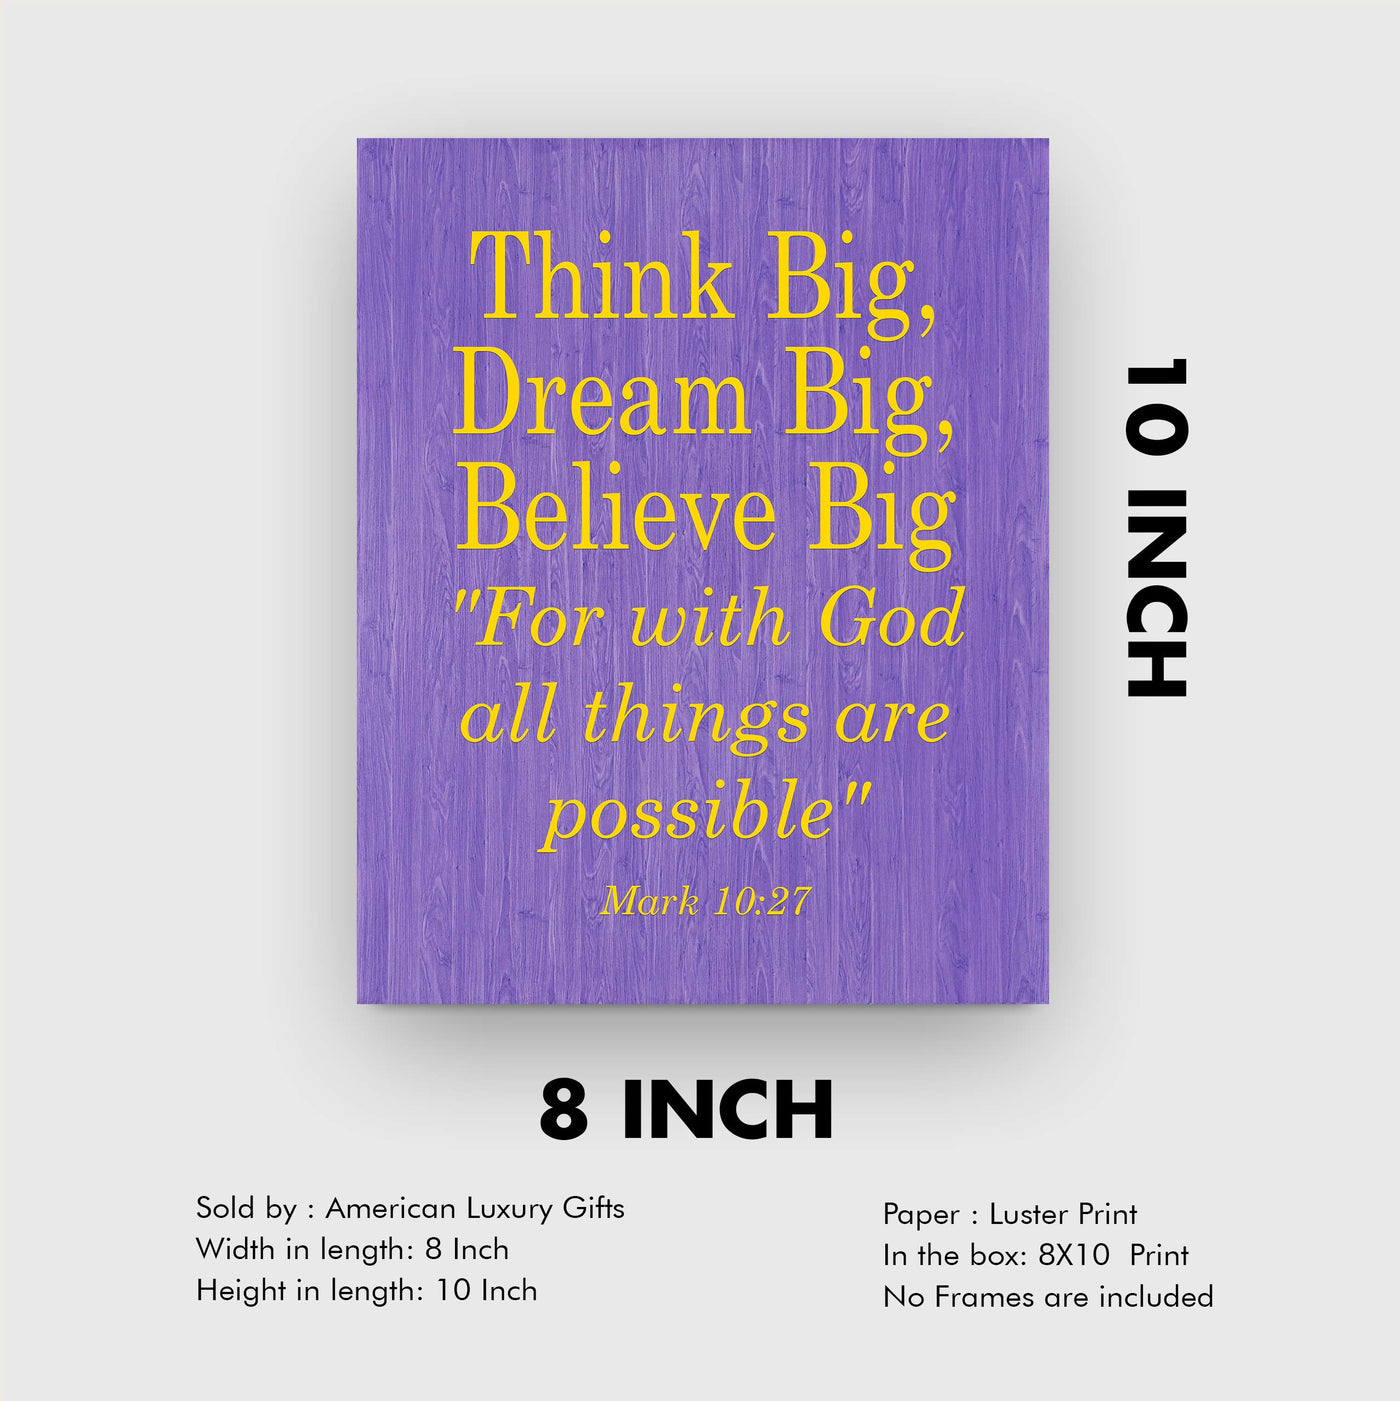 ?Think Big-For With God All Things Are Possible?-Mark 10:27-Bible Verse Wall Art-8x10" Christian Poster Print-Ready to Frame. Modern Typographic Design. Inspirational Home-Office-Church Decor.